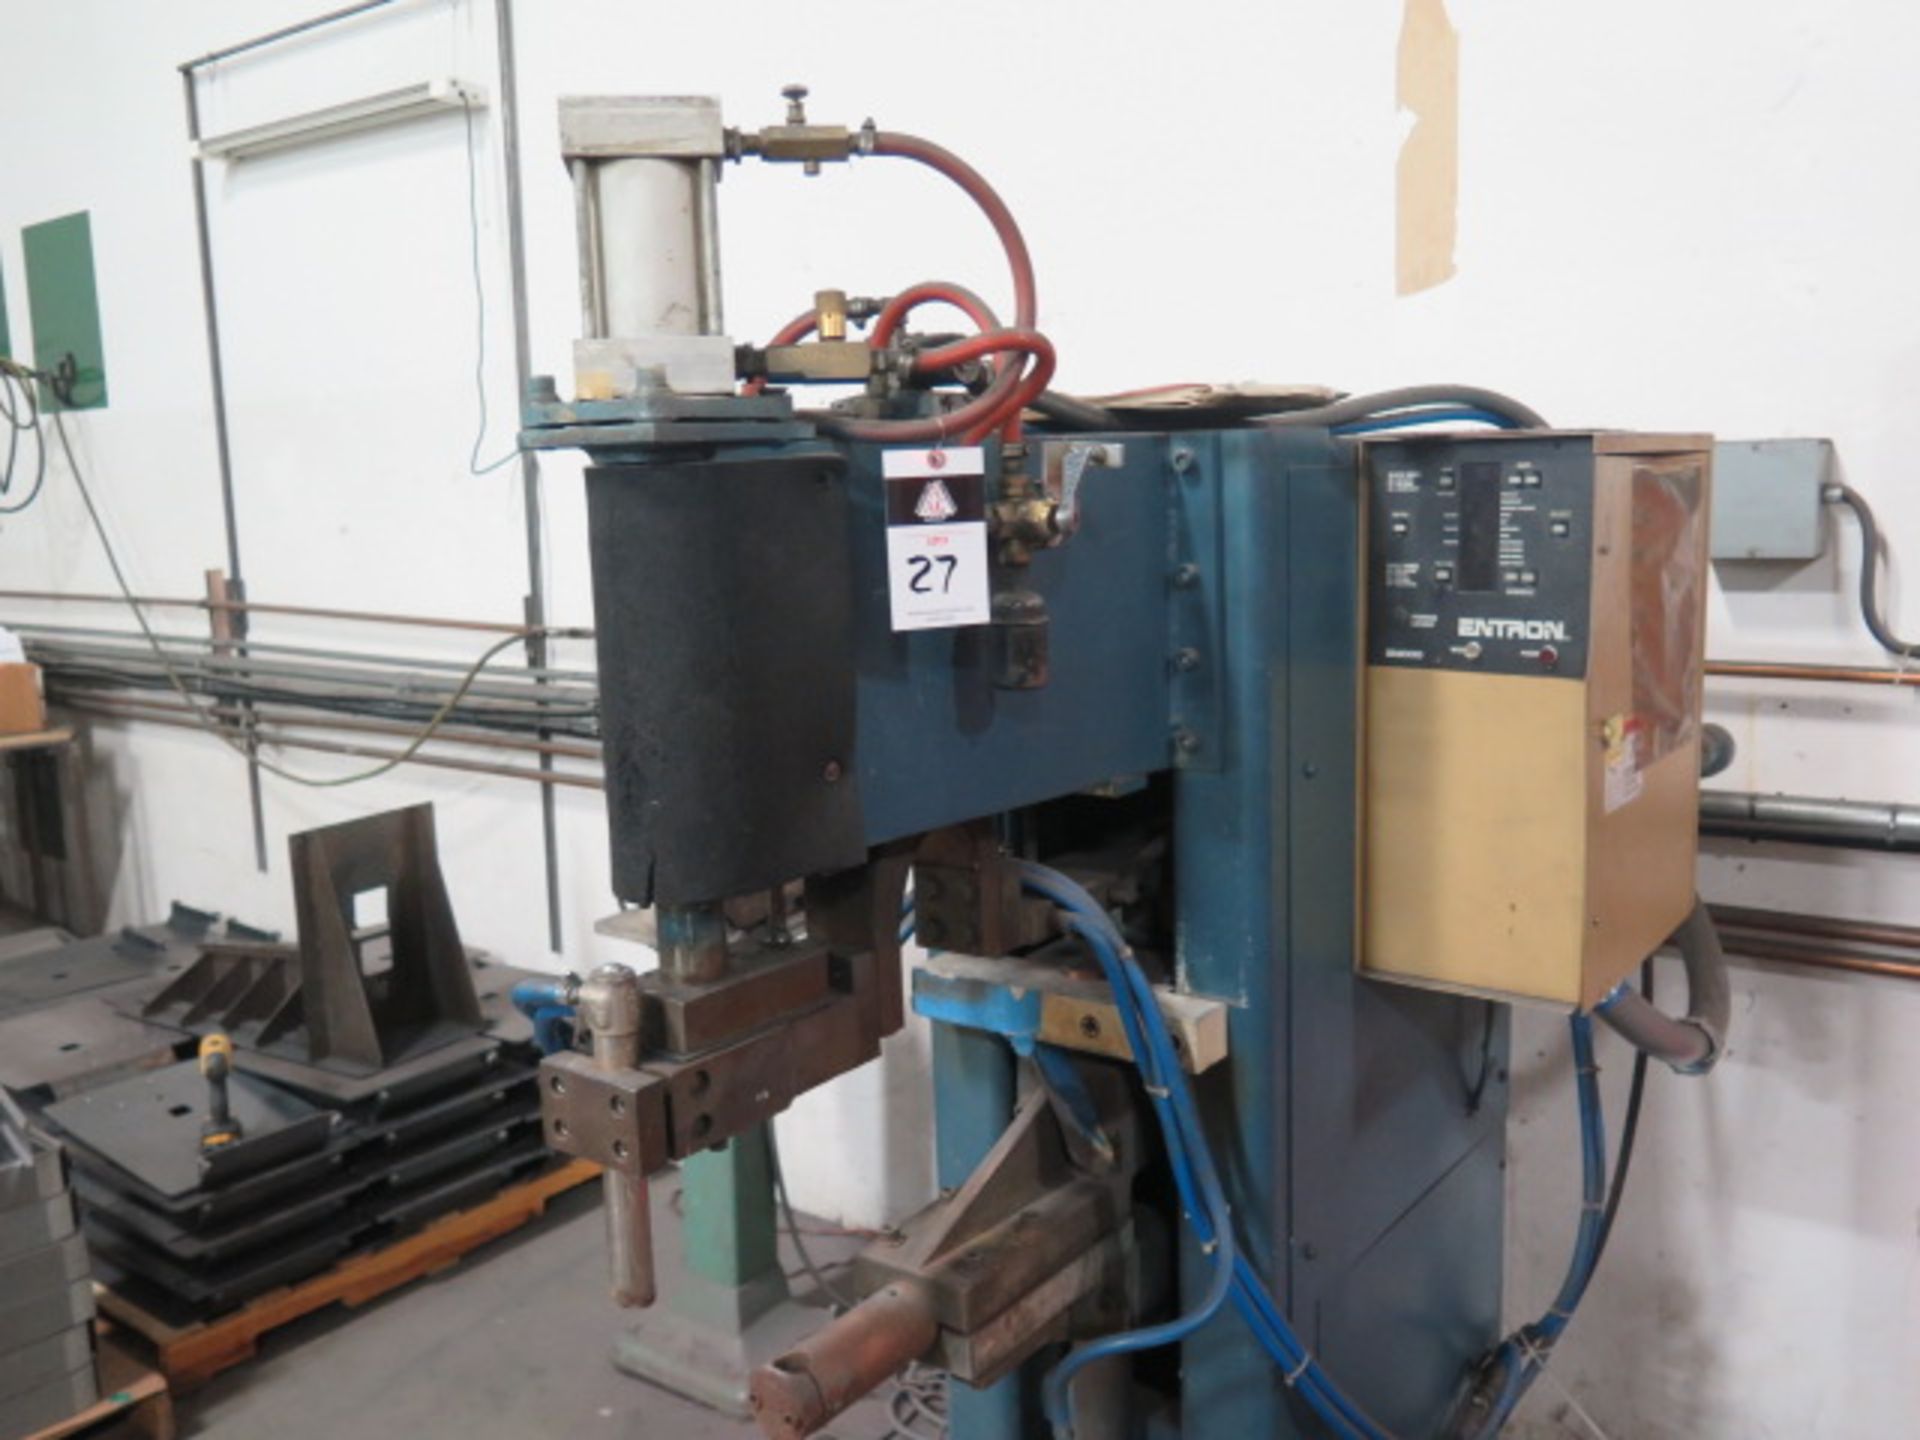 Entron Pneumatic Actuated Spot Welder s/n L-8981 w/ Entron Controls (SOLD AS-IS - NO WARRANTY) - Image 2 of 8